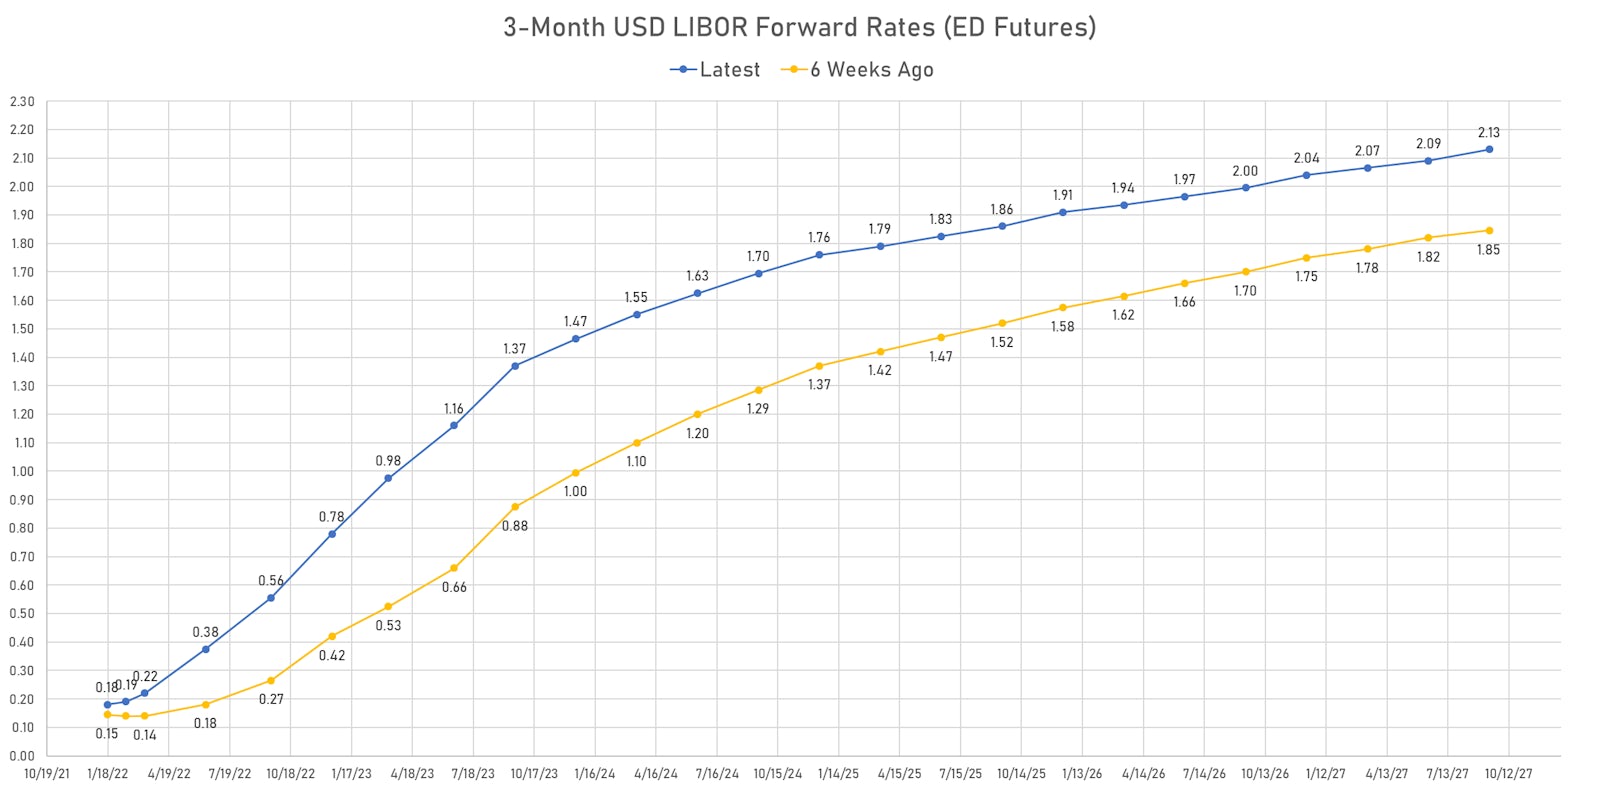 Recent Shift Up In The Rates Curve (3-month Eurodollar futures implied yields) | Sources: ϕpost, Refinitiv data